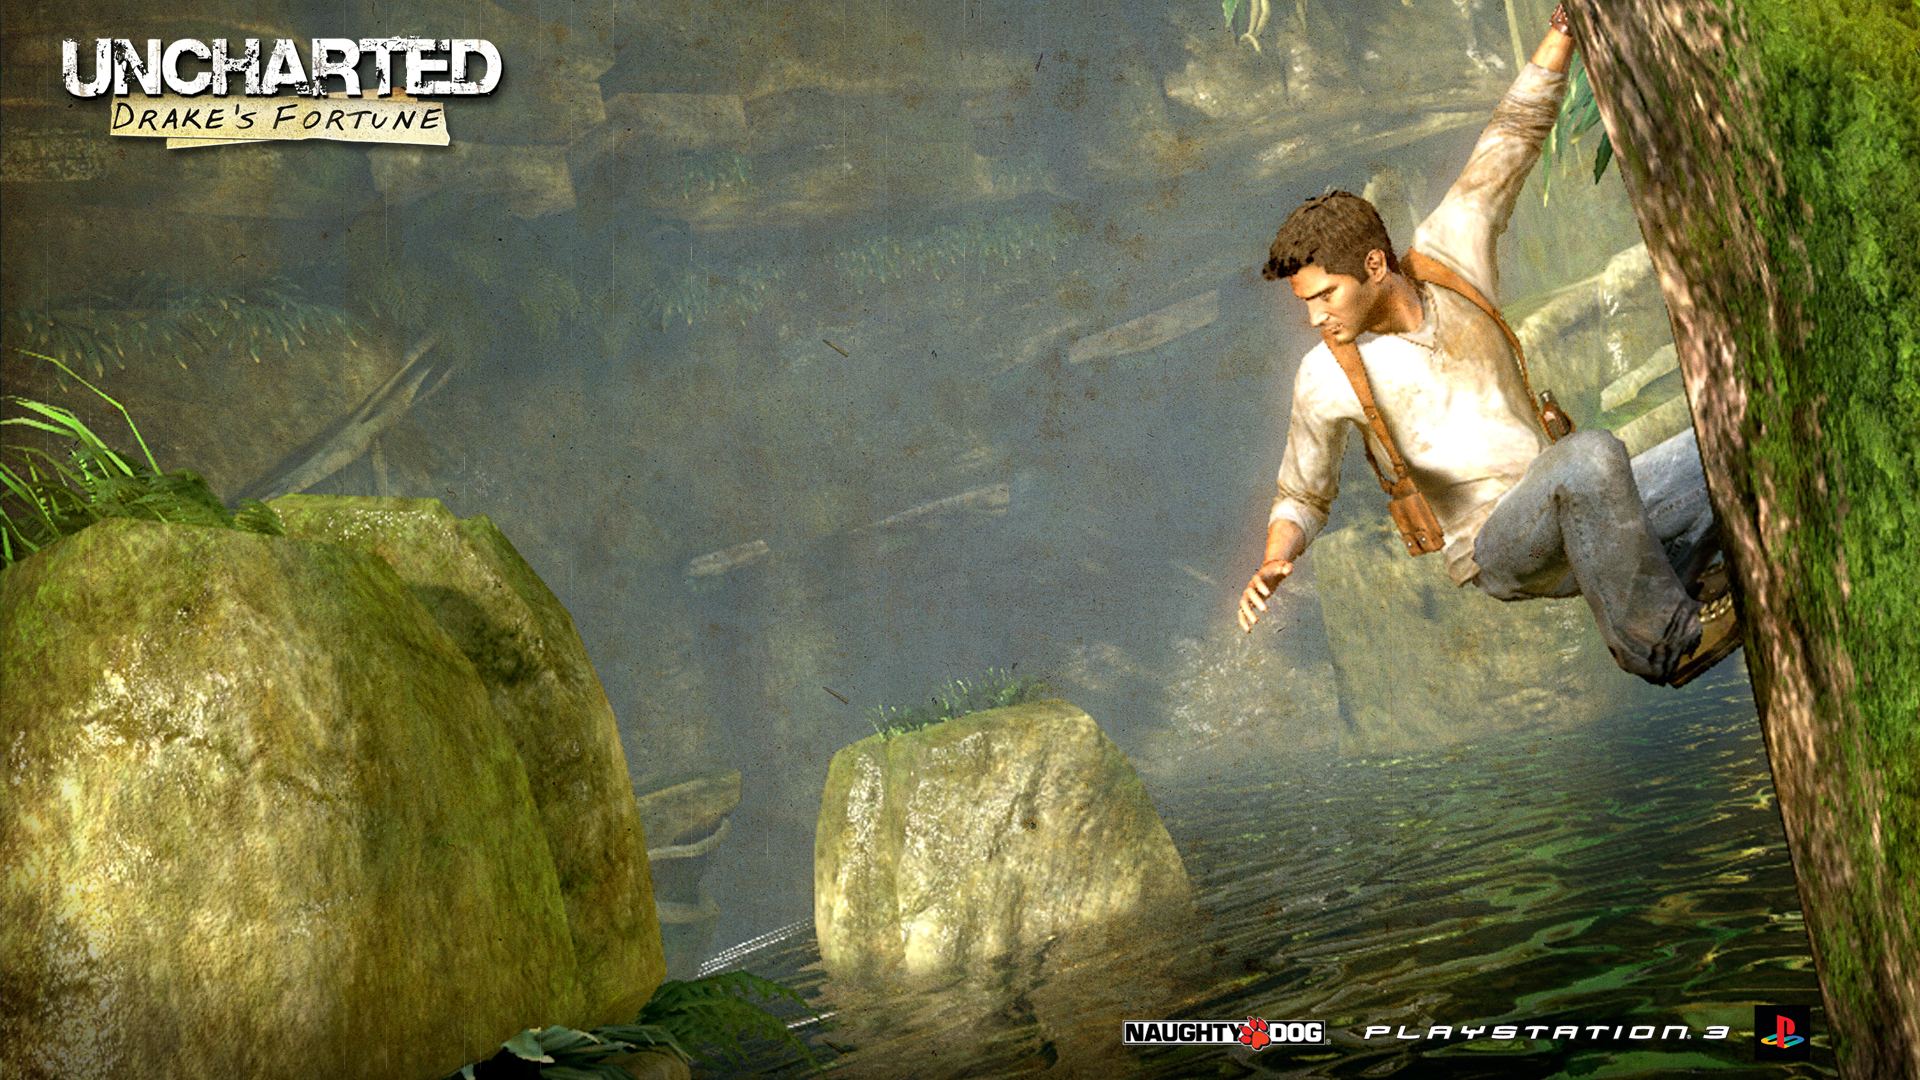 Preparing Wallpaper Scroll Image Uncharted Themes